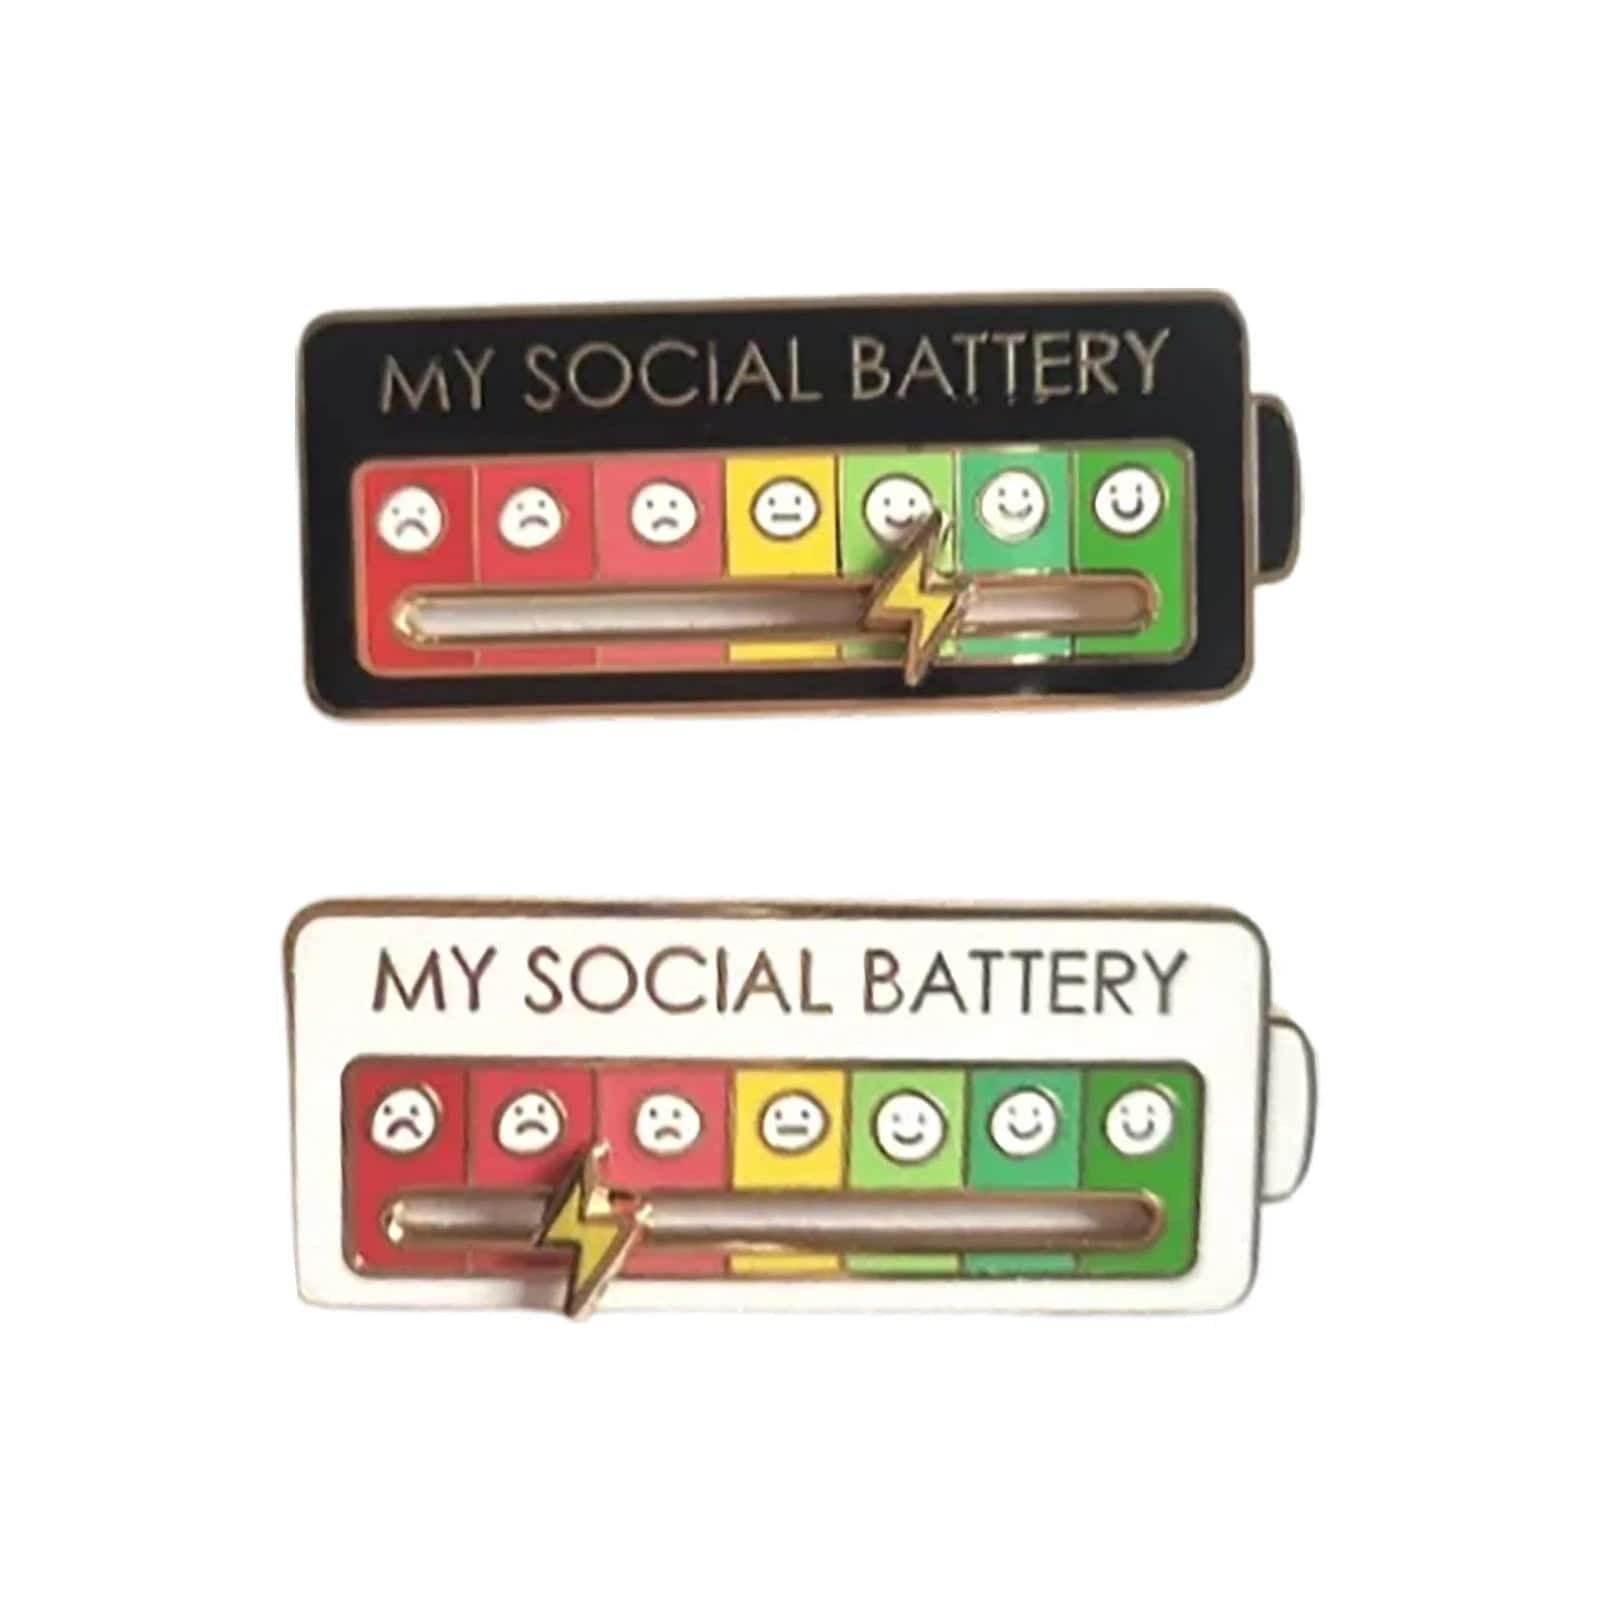 HomeBound Essentials EmotionTrend Pins: Social Battery Mood Tracker Enamel Metal Brooch Badges, Fashion Jewelry Accessory Gift